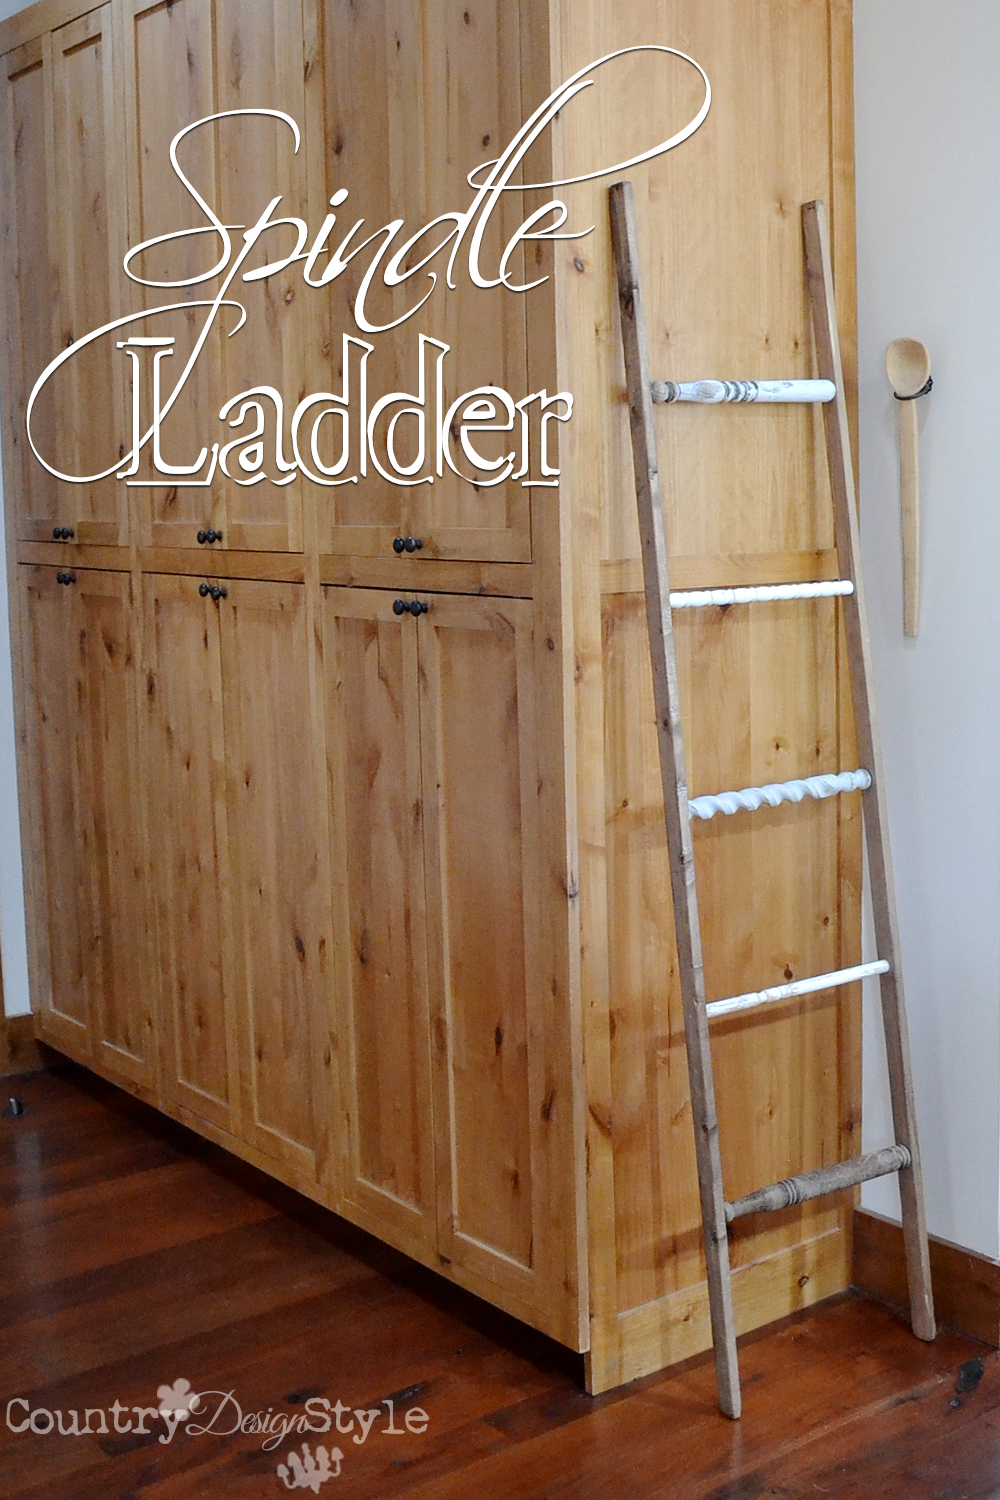 spindle-ladder-country-design-style-pn2